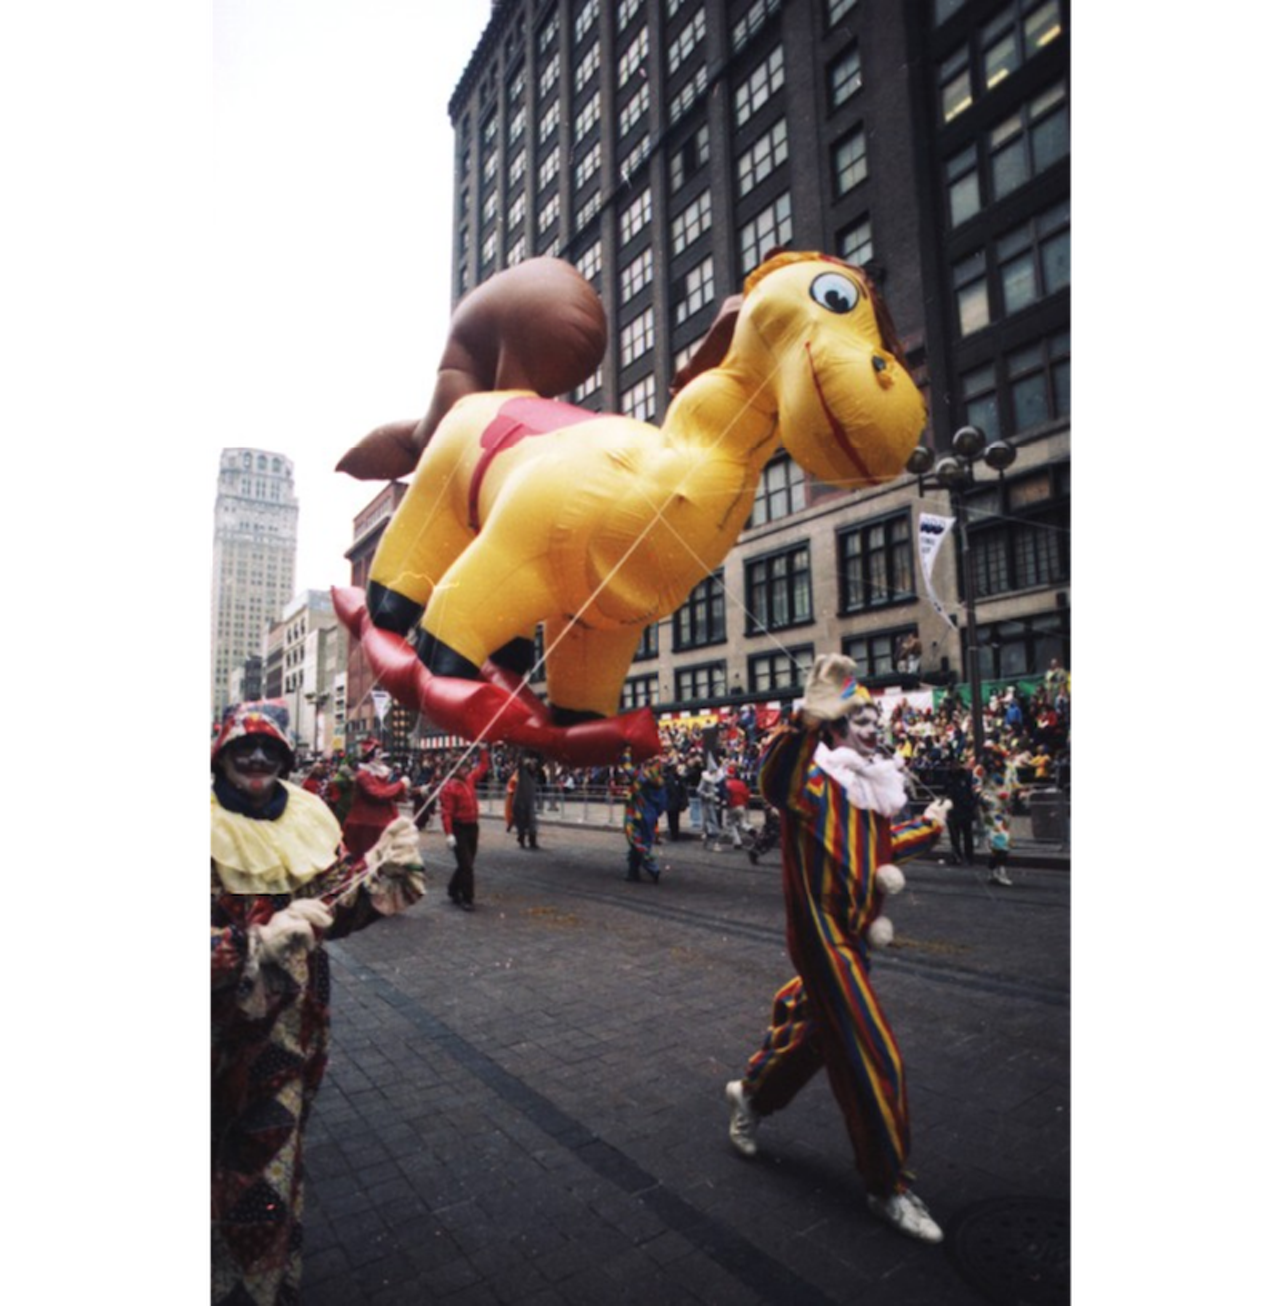 Thanksgiving Day Parade in Detroit. (1981)
All photos courtesy of Walter P. Reuther Library, Archives of Labor and Urban Affairs, Wayne State University